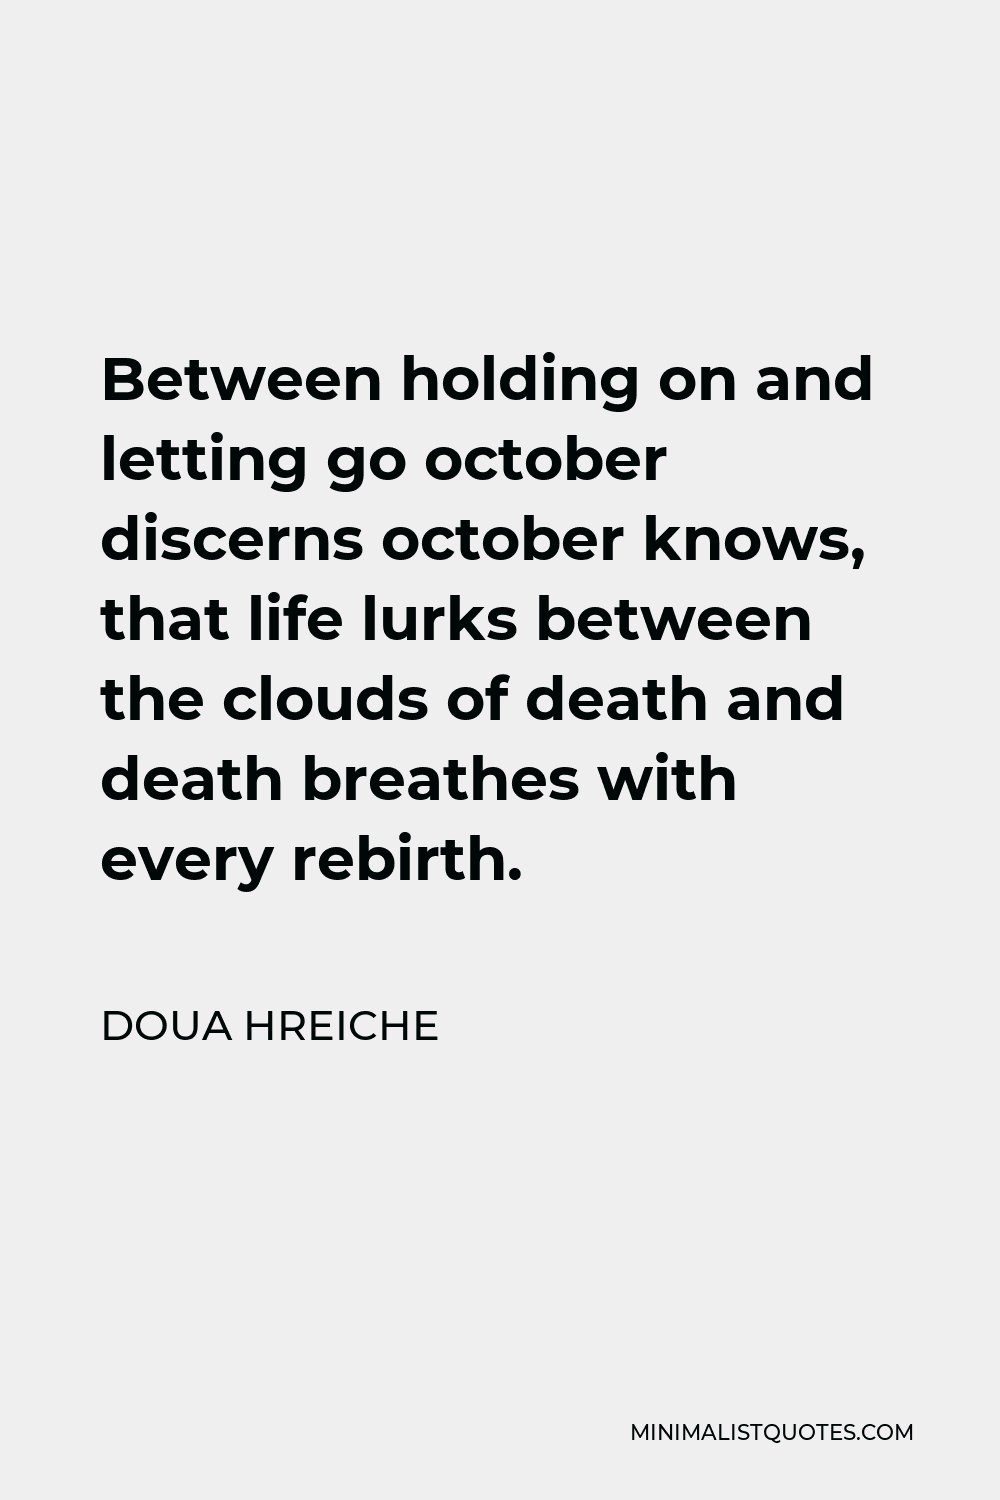 Doua Hreiche Quote - Between holding on and letting go october discerns october knows, that life lurks between the clouds of death and death breathes with every rebirth.